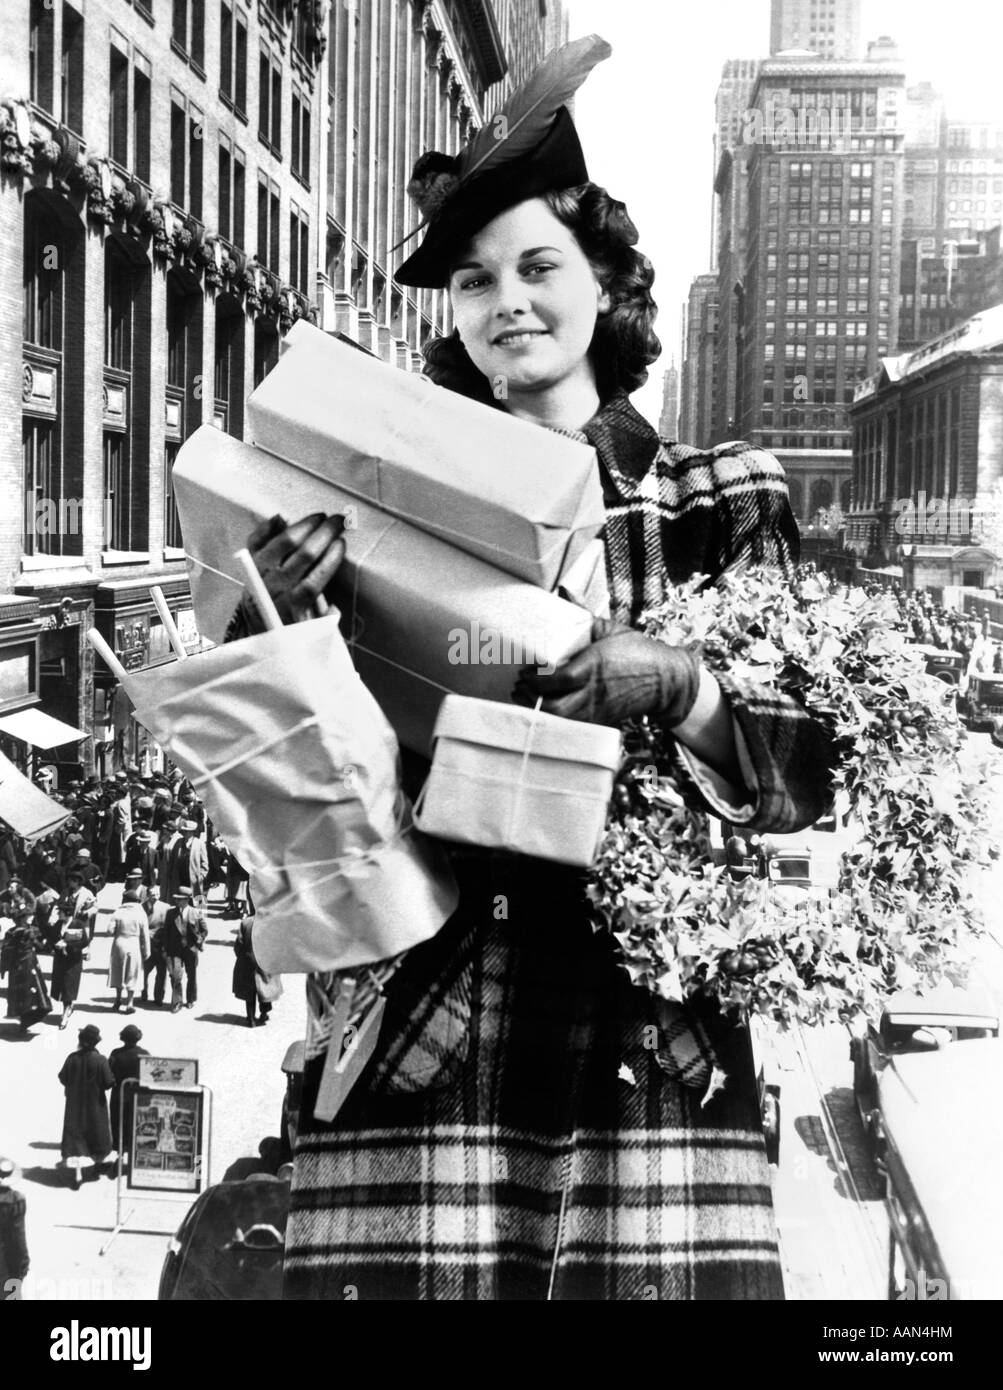 1930s 1940s WOMAN LOOKING AT CAMERA ARMS FULL WITH CHRISTMAS SHOPPING PACKAGES & WREATH COMPOSITE WITH STREET SCENE Stock Photo